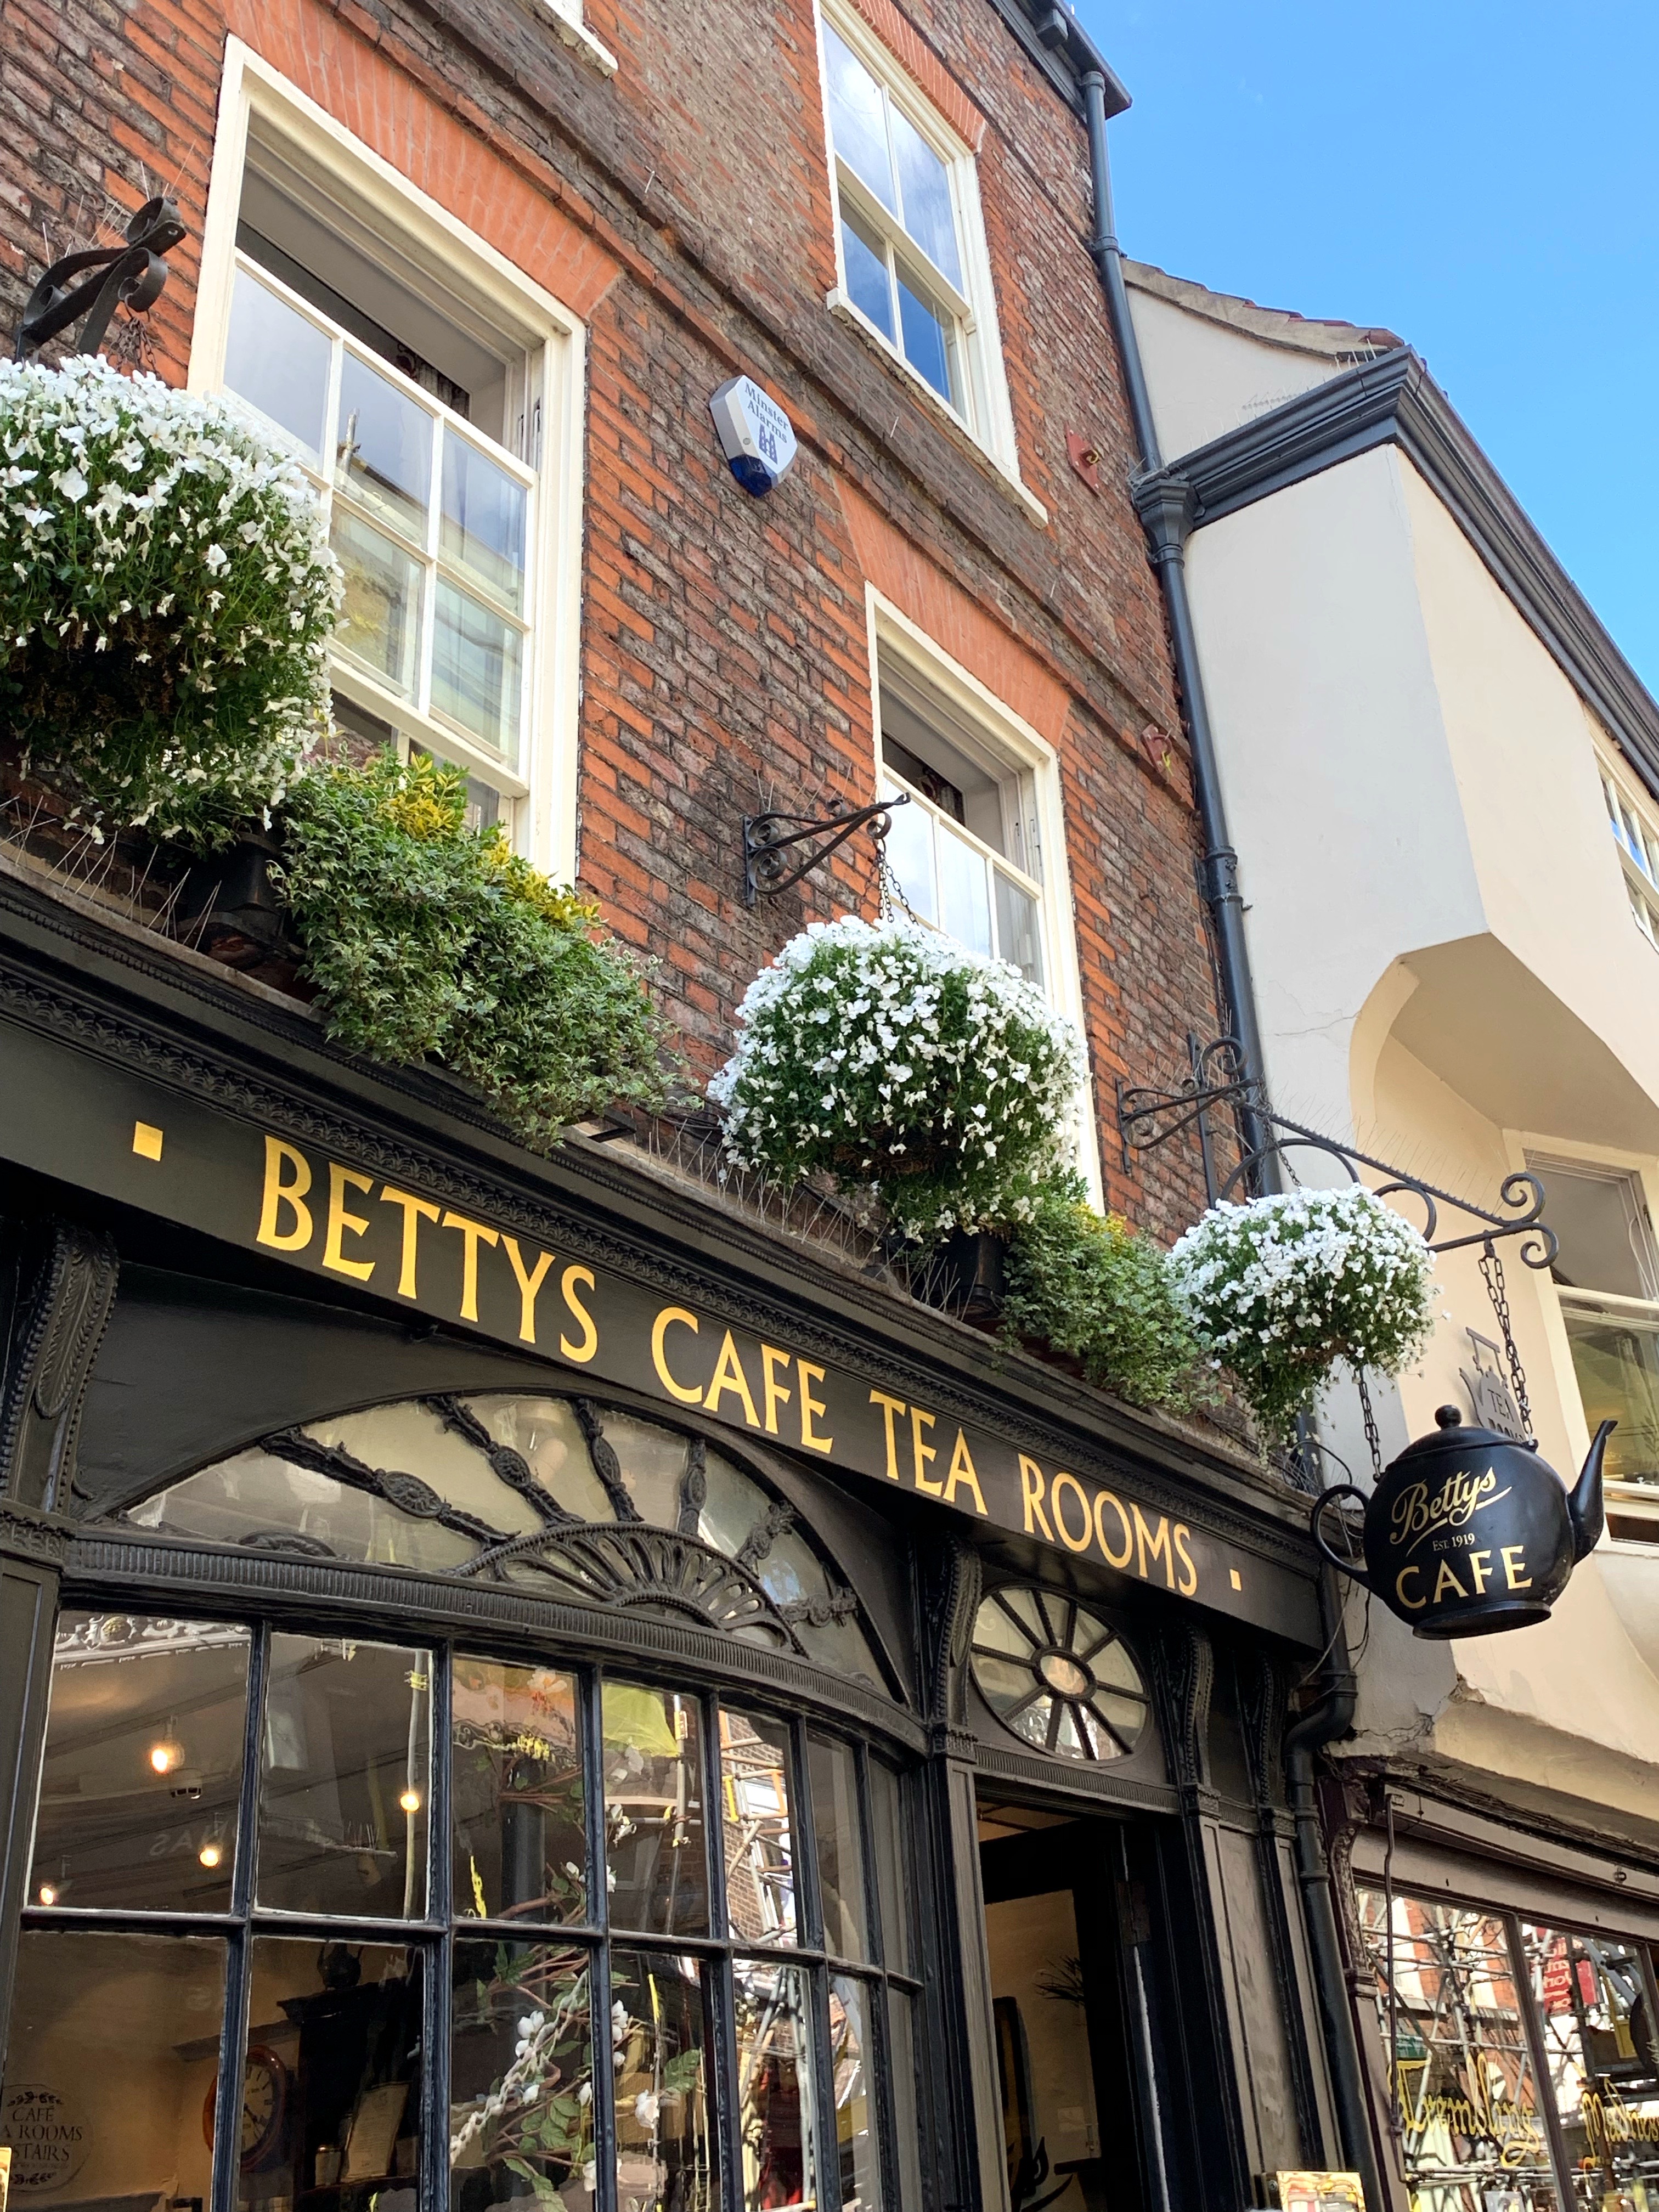 Betty's Cafe Tea Rooms in York, England